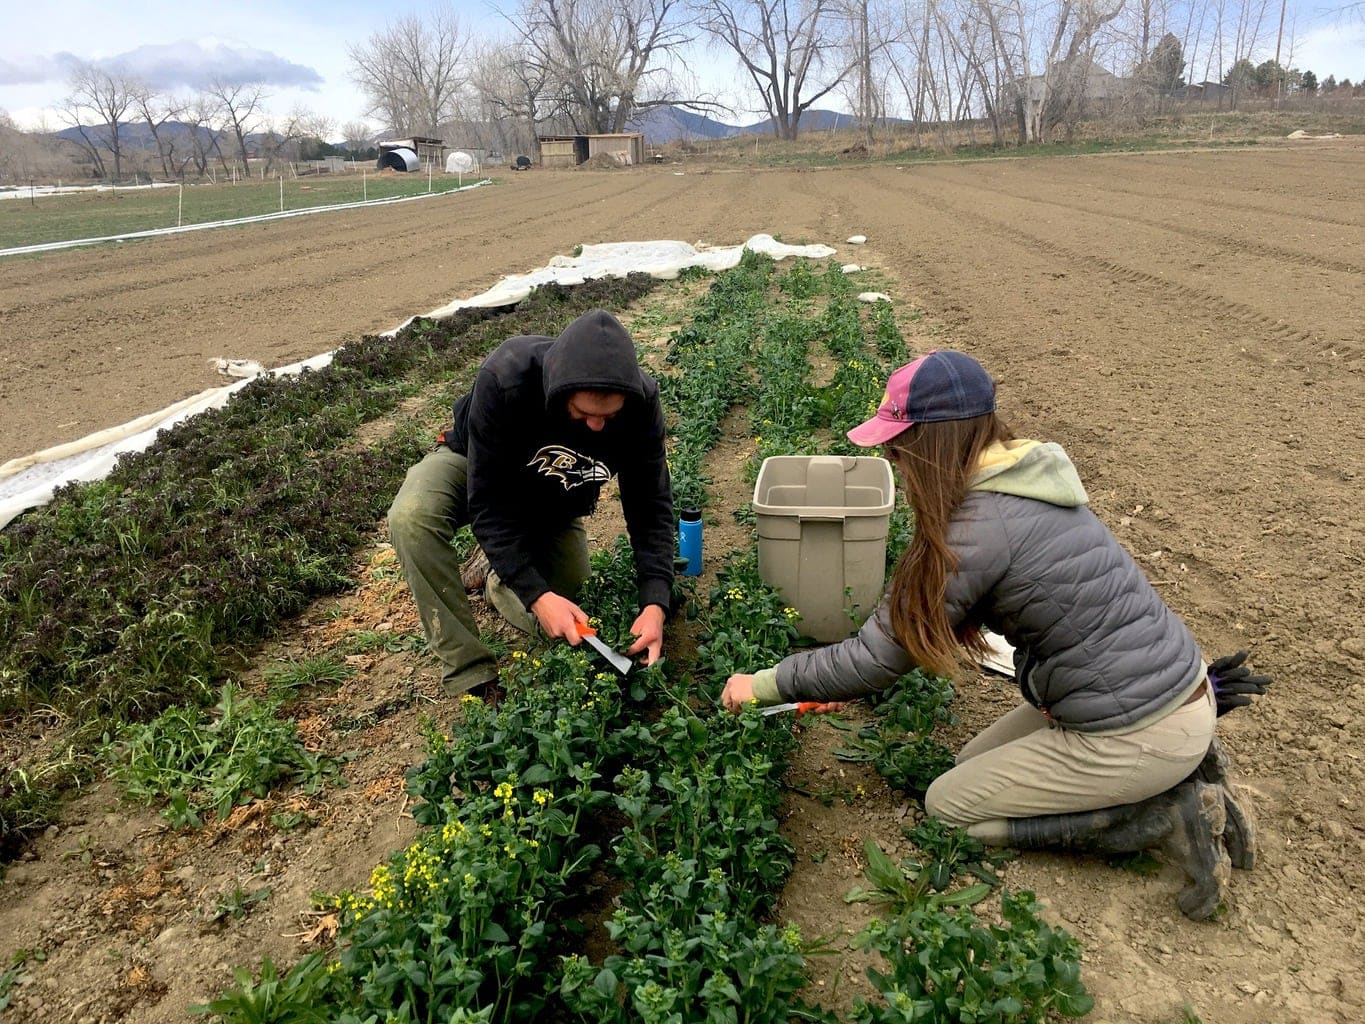 Greens flower nearly year-round, outdoors in Colorado, at the certified biodynamic and organic Black Cat Farm, which supplies the farm-to-table restaurants Black Cat Bistro and Bramble & Hare with produce for much of the year.